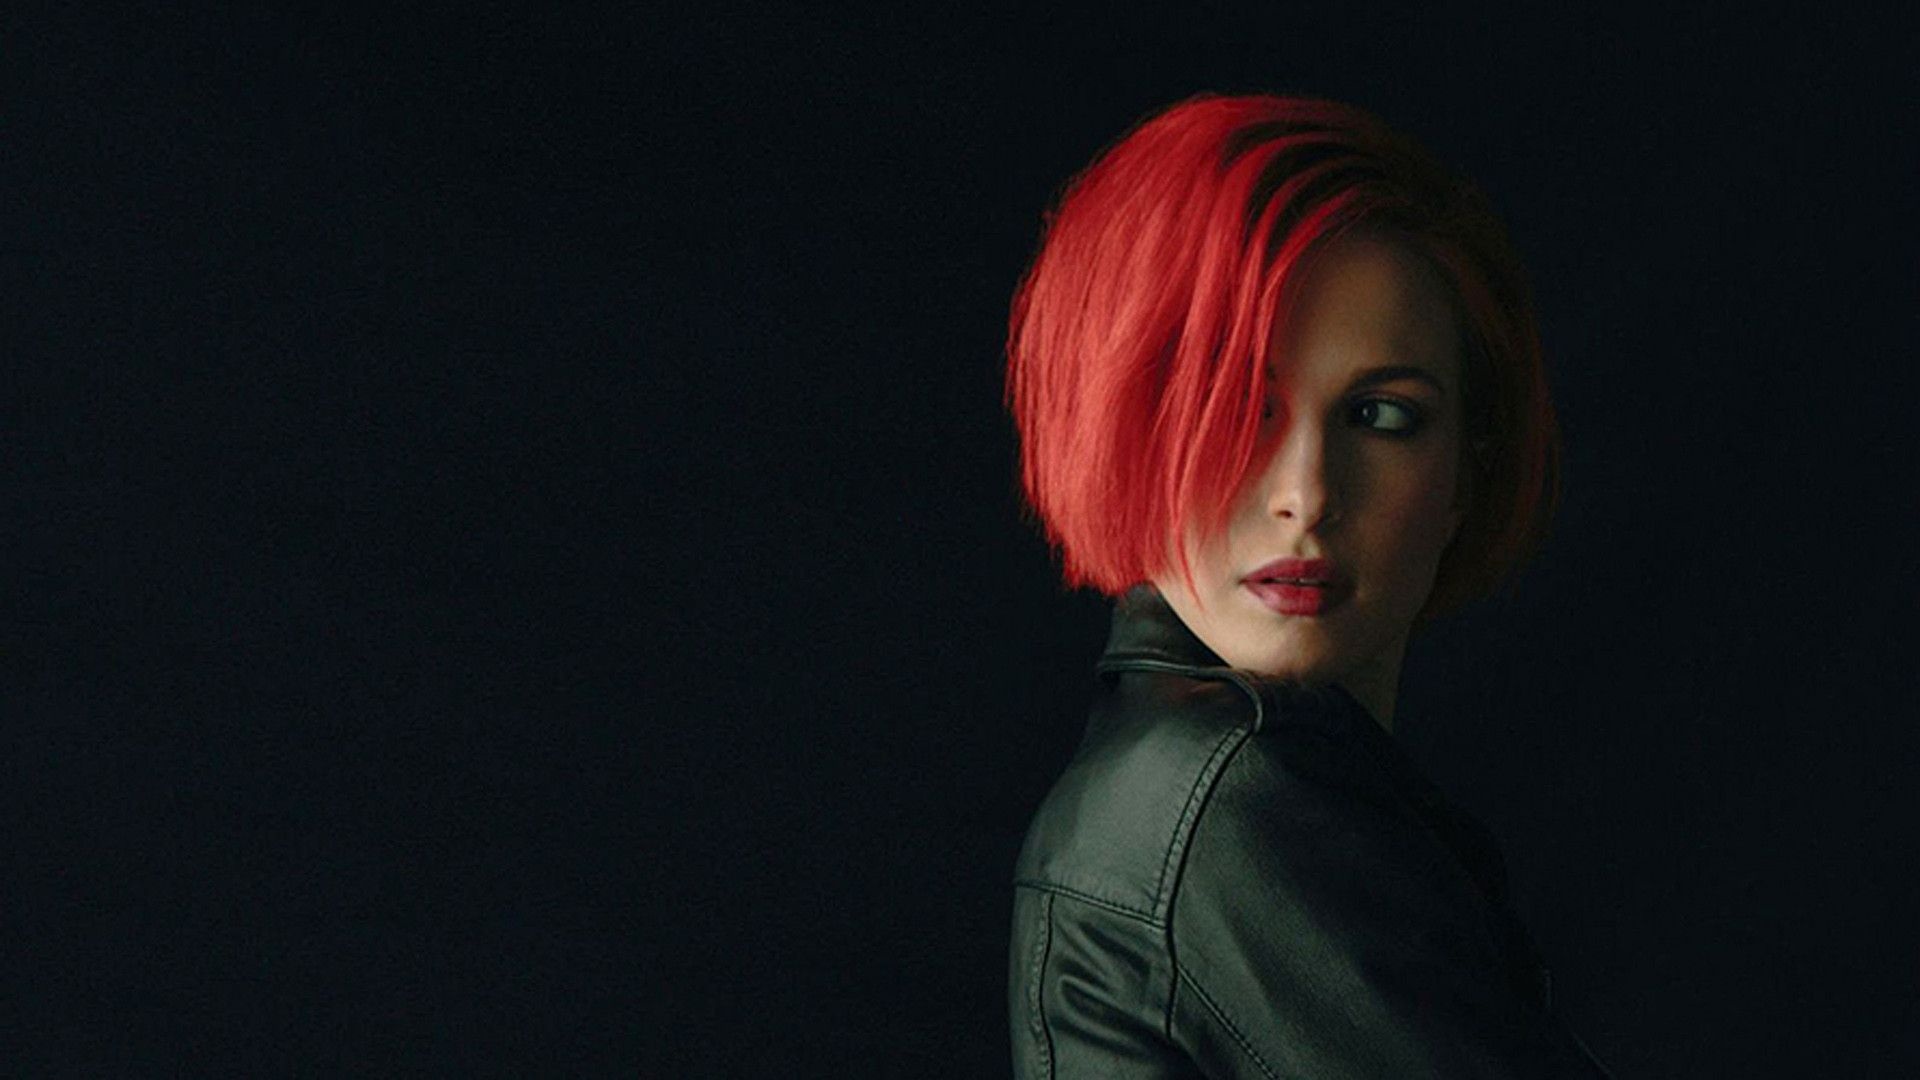 Paramore: Williams, A guiding light of the emo-centric pop-punk scene of the mid-2000s. 1920x1080 Full HD Wallpaper.